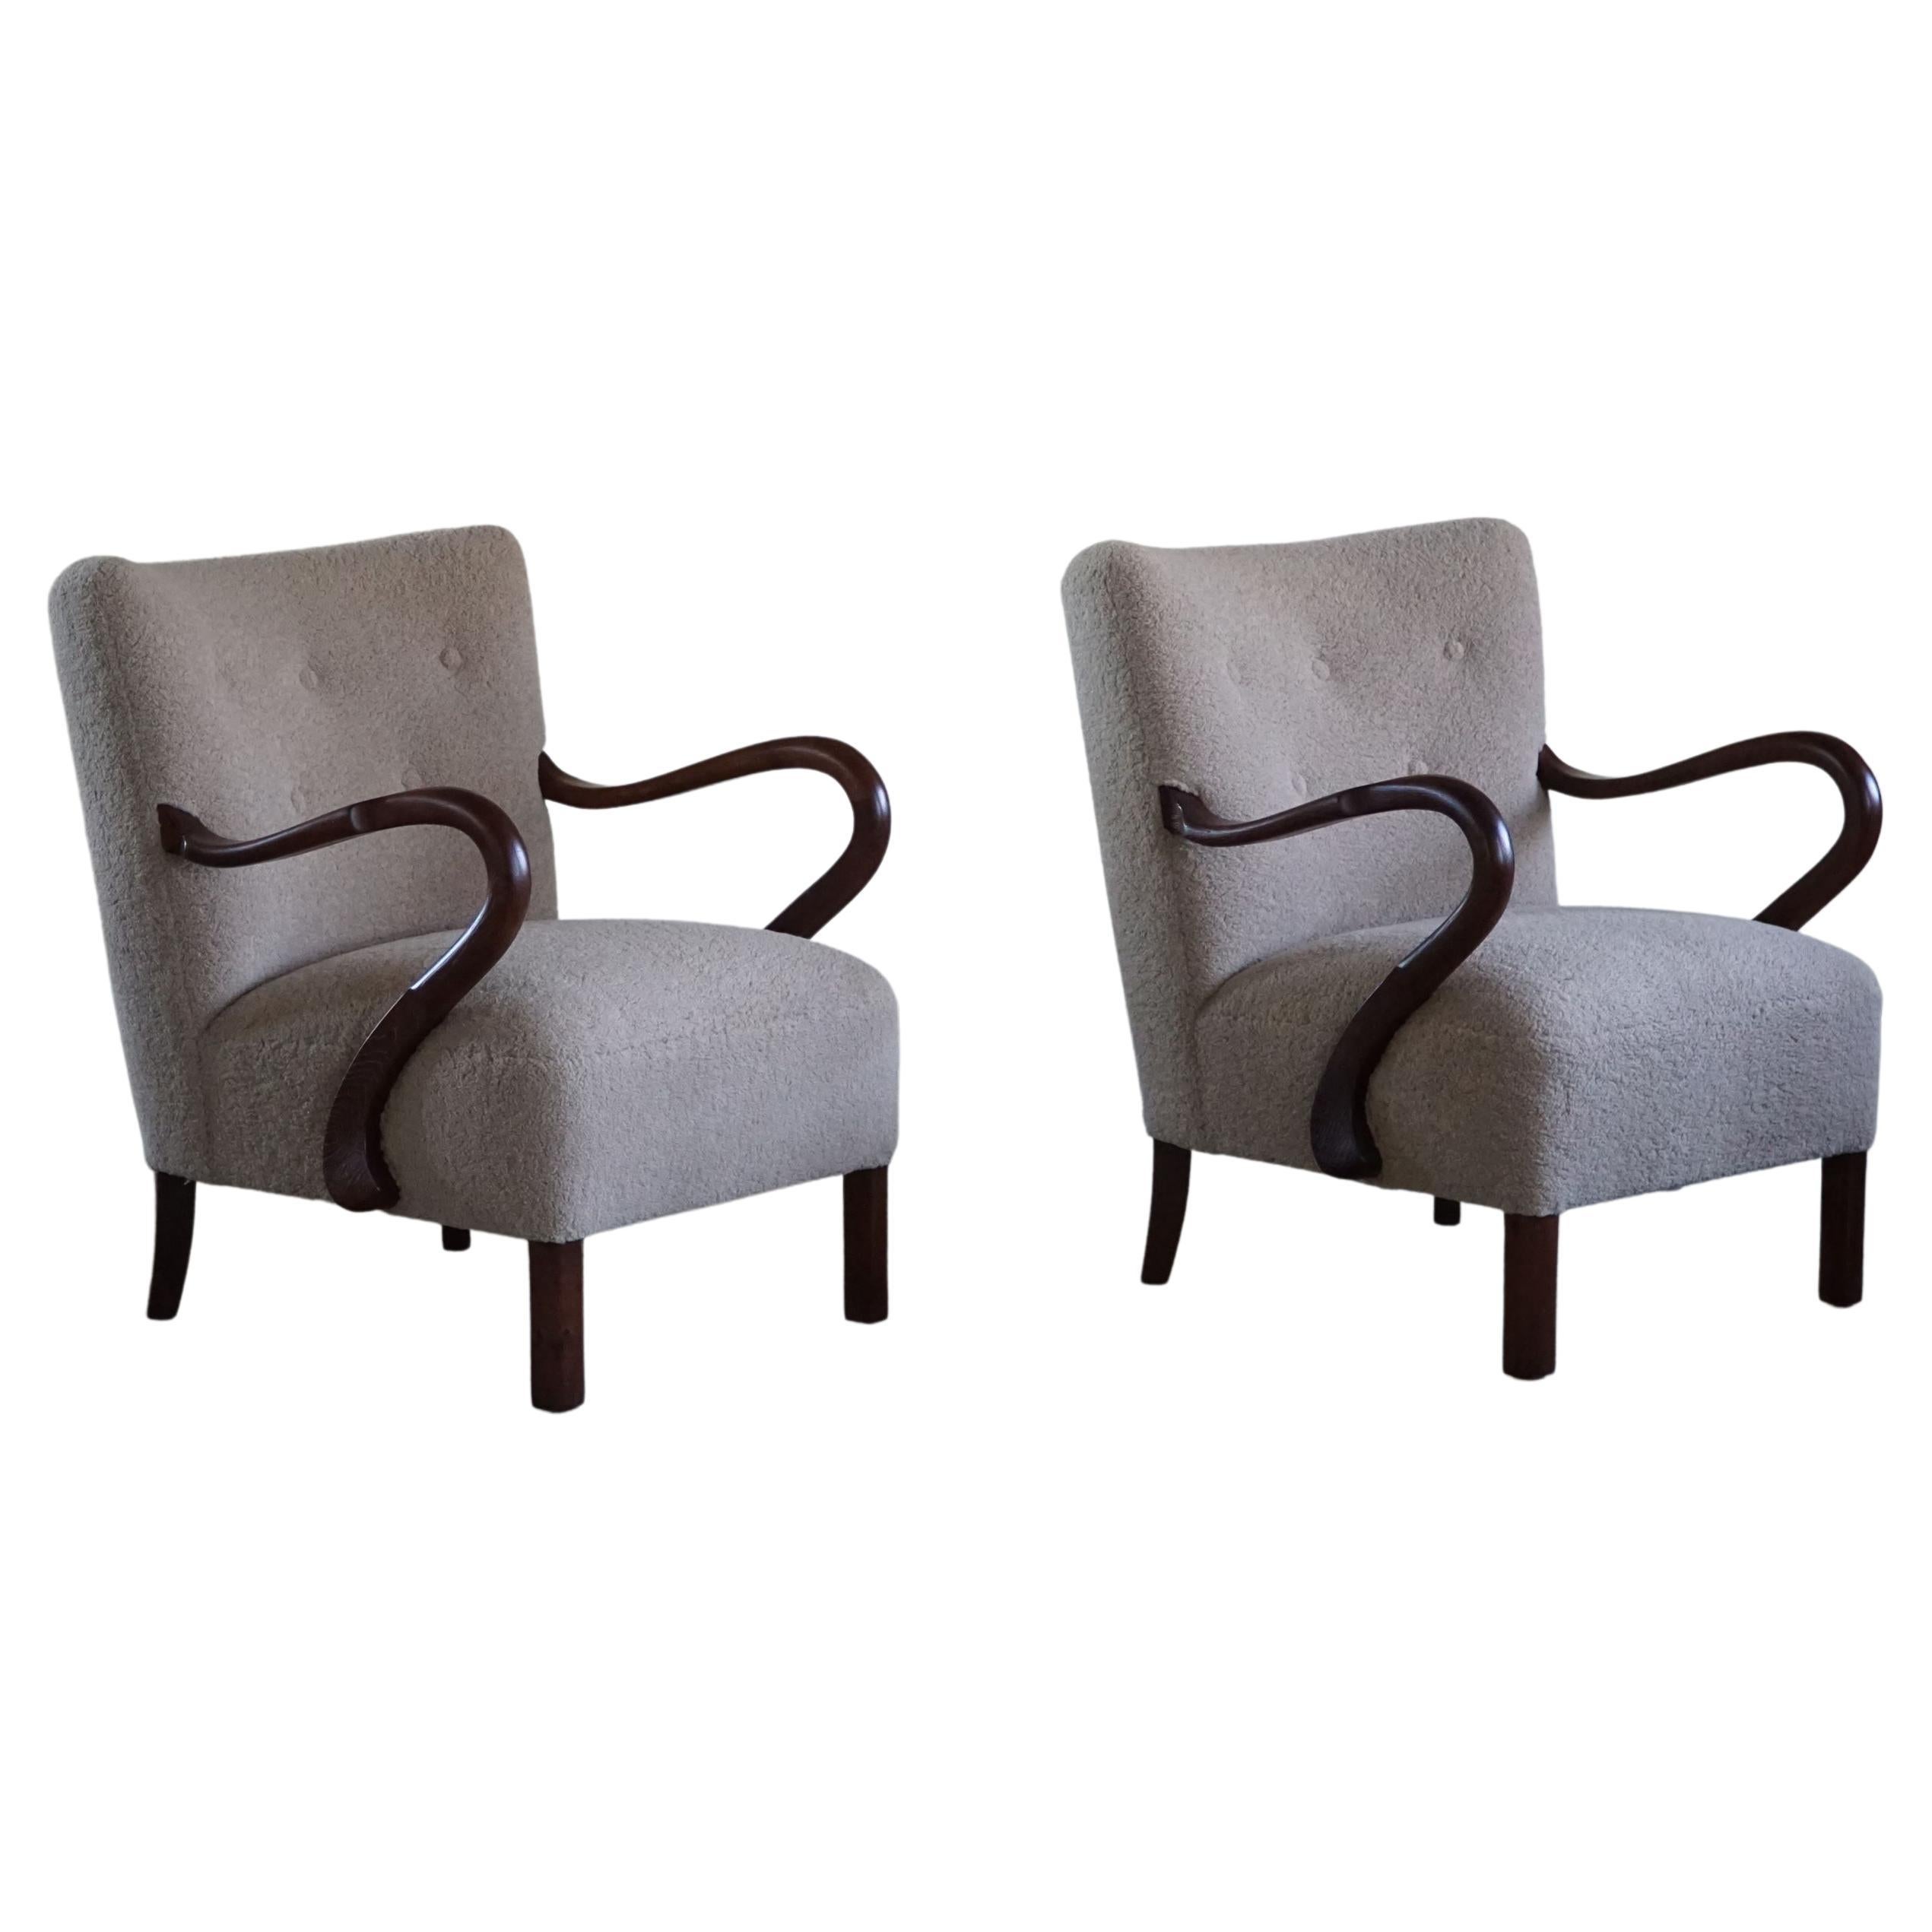 Pair of Danish Modern Lounge Chairs with New Fabric by Alfred Christensen, 1940s